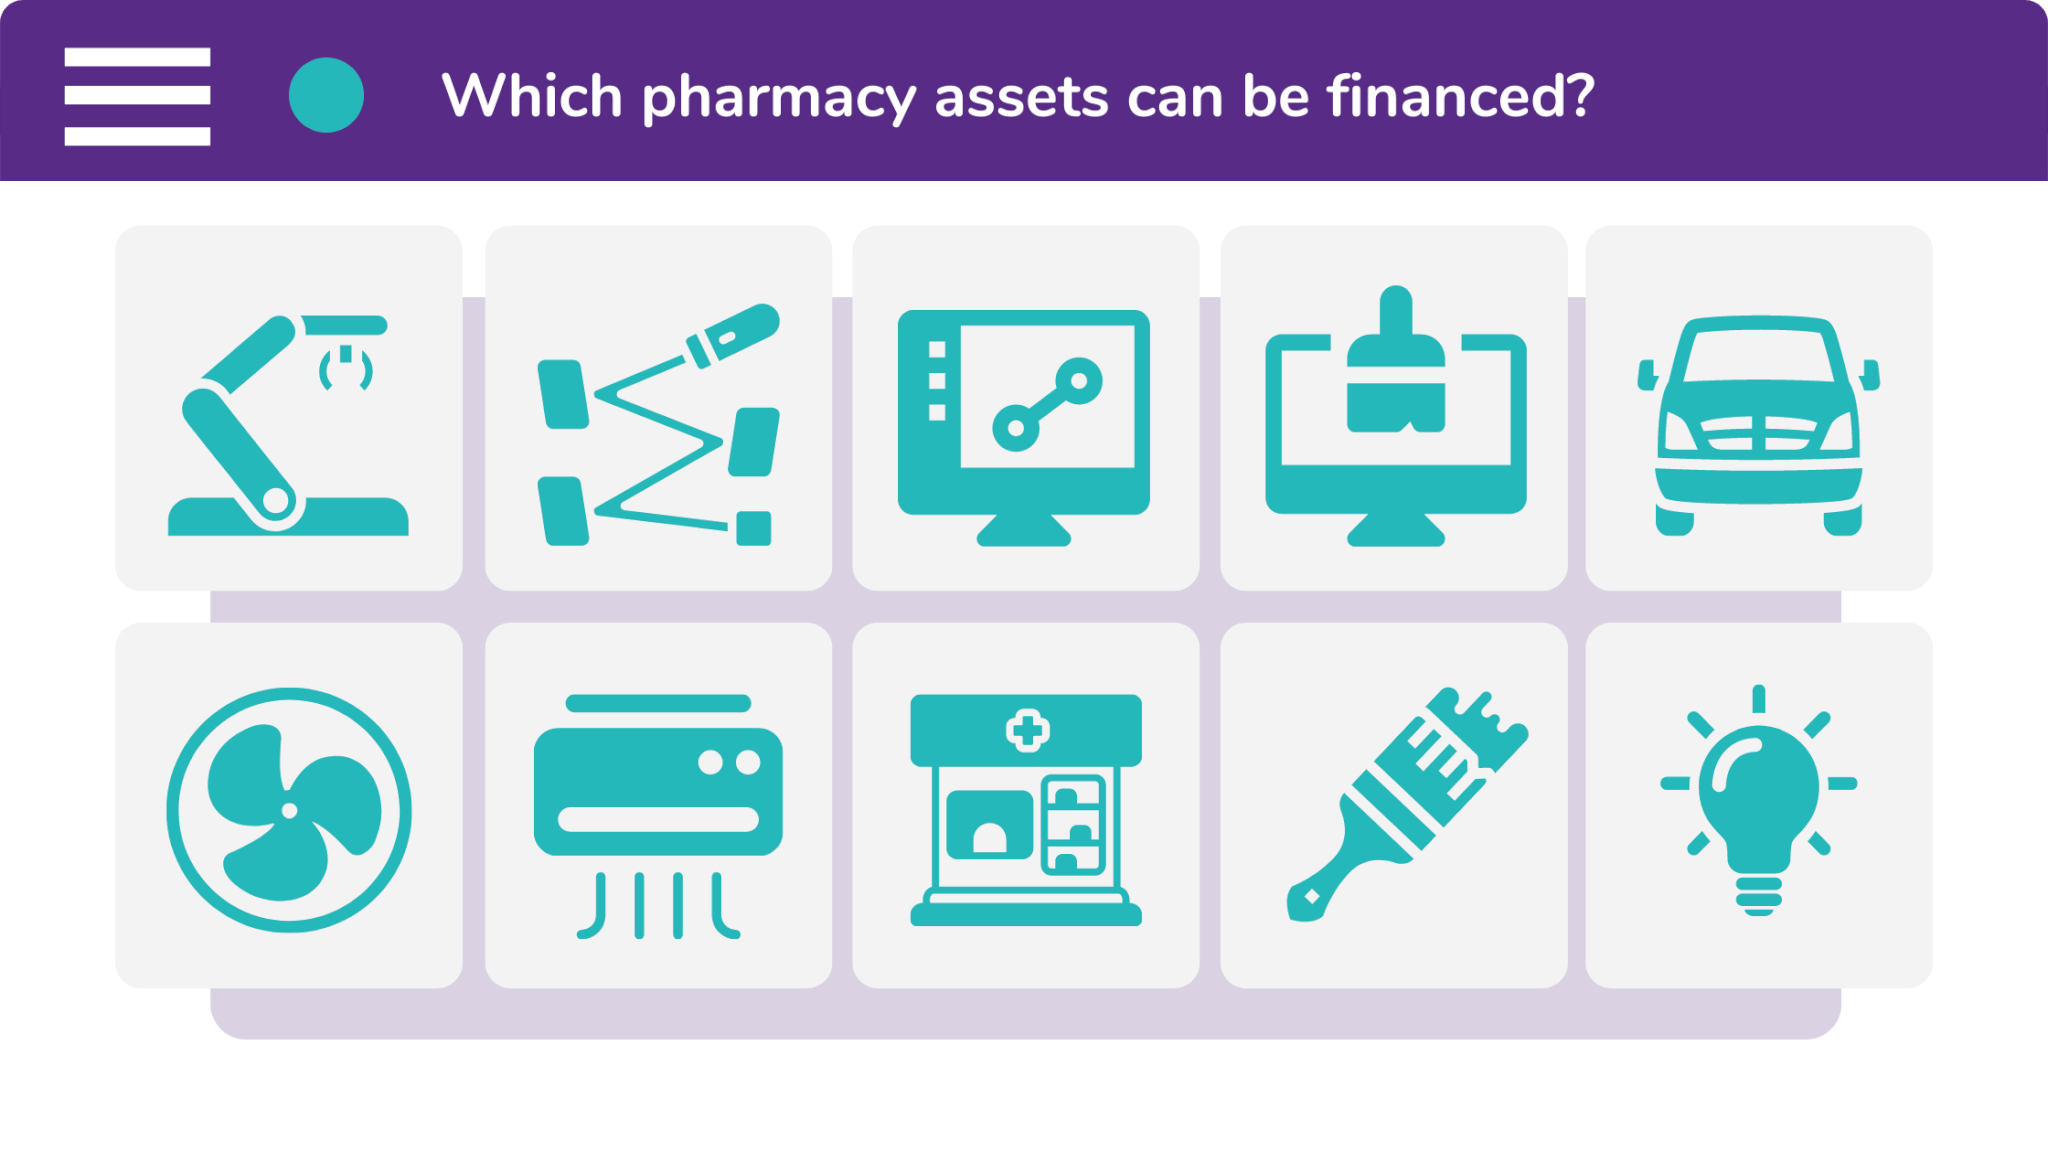 You can finance a variety of pharmacy assets, from dispensing robots to PMR software.